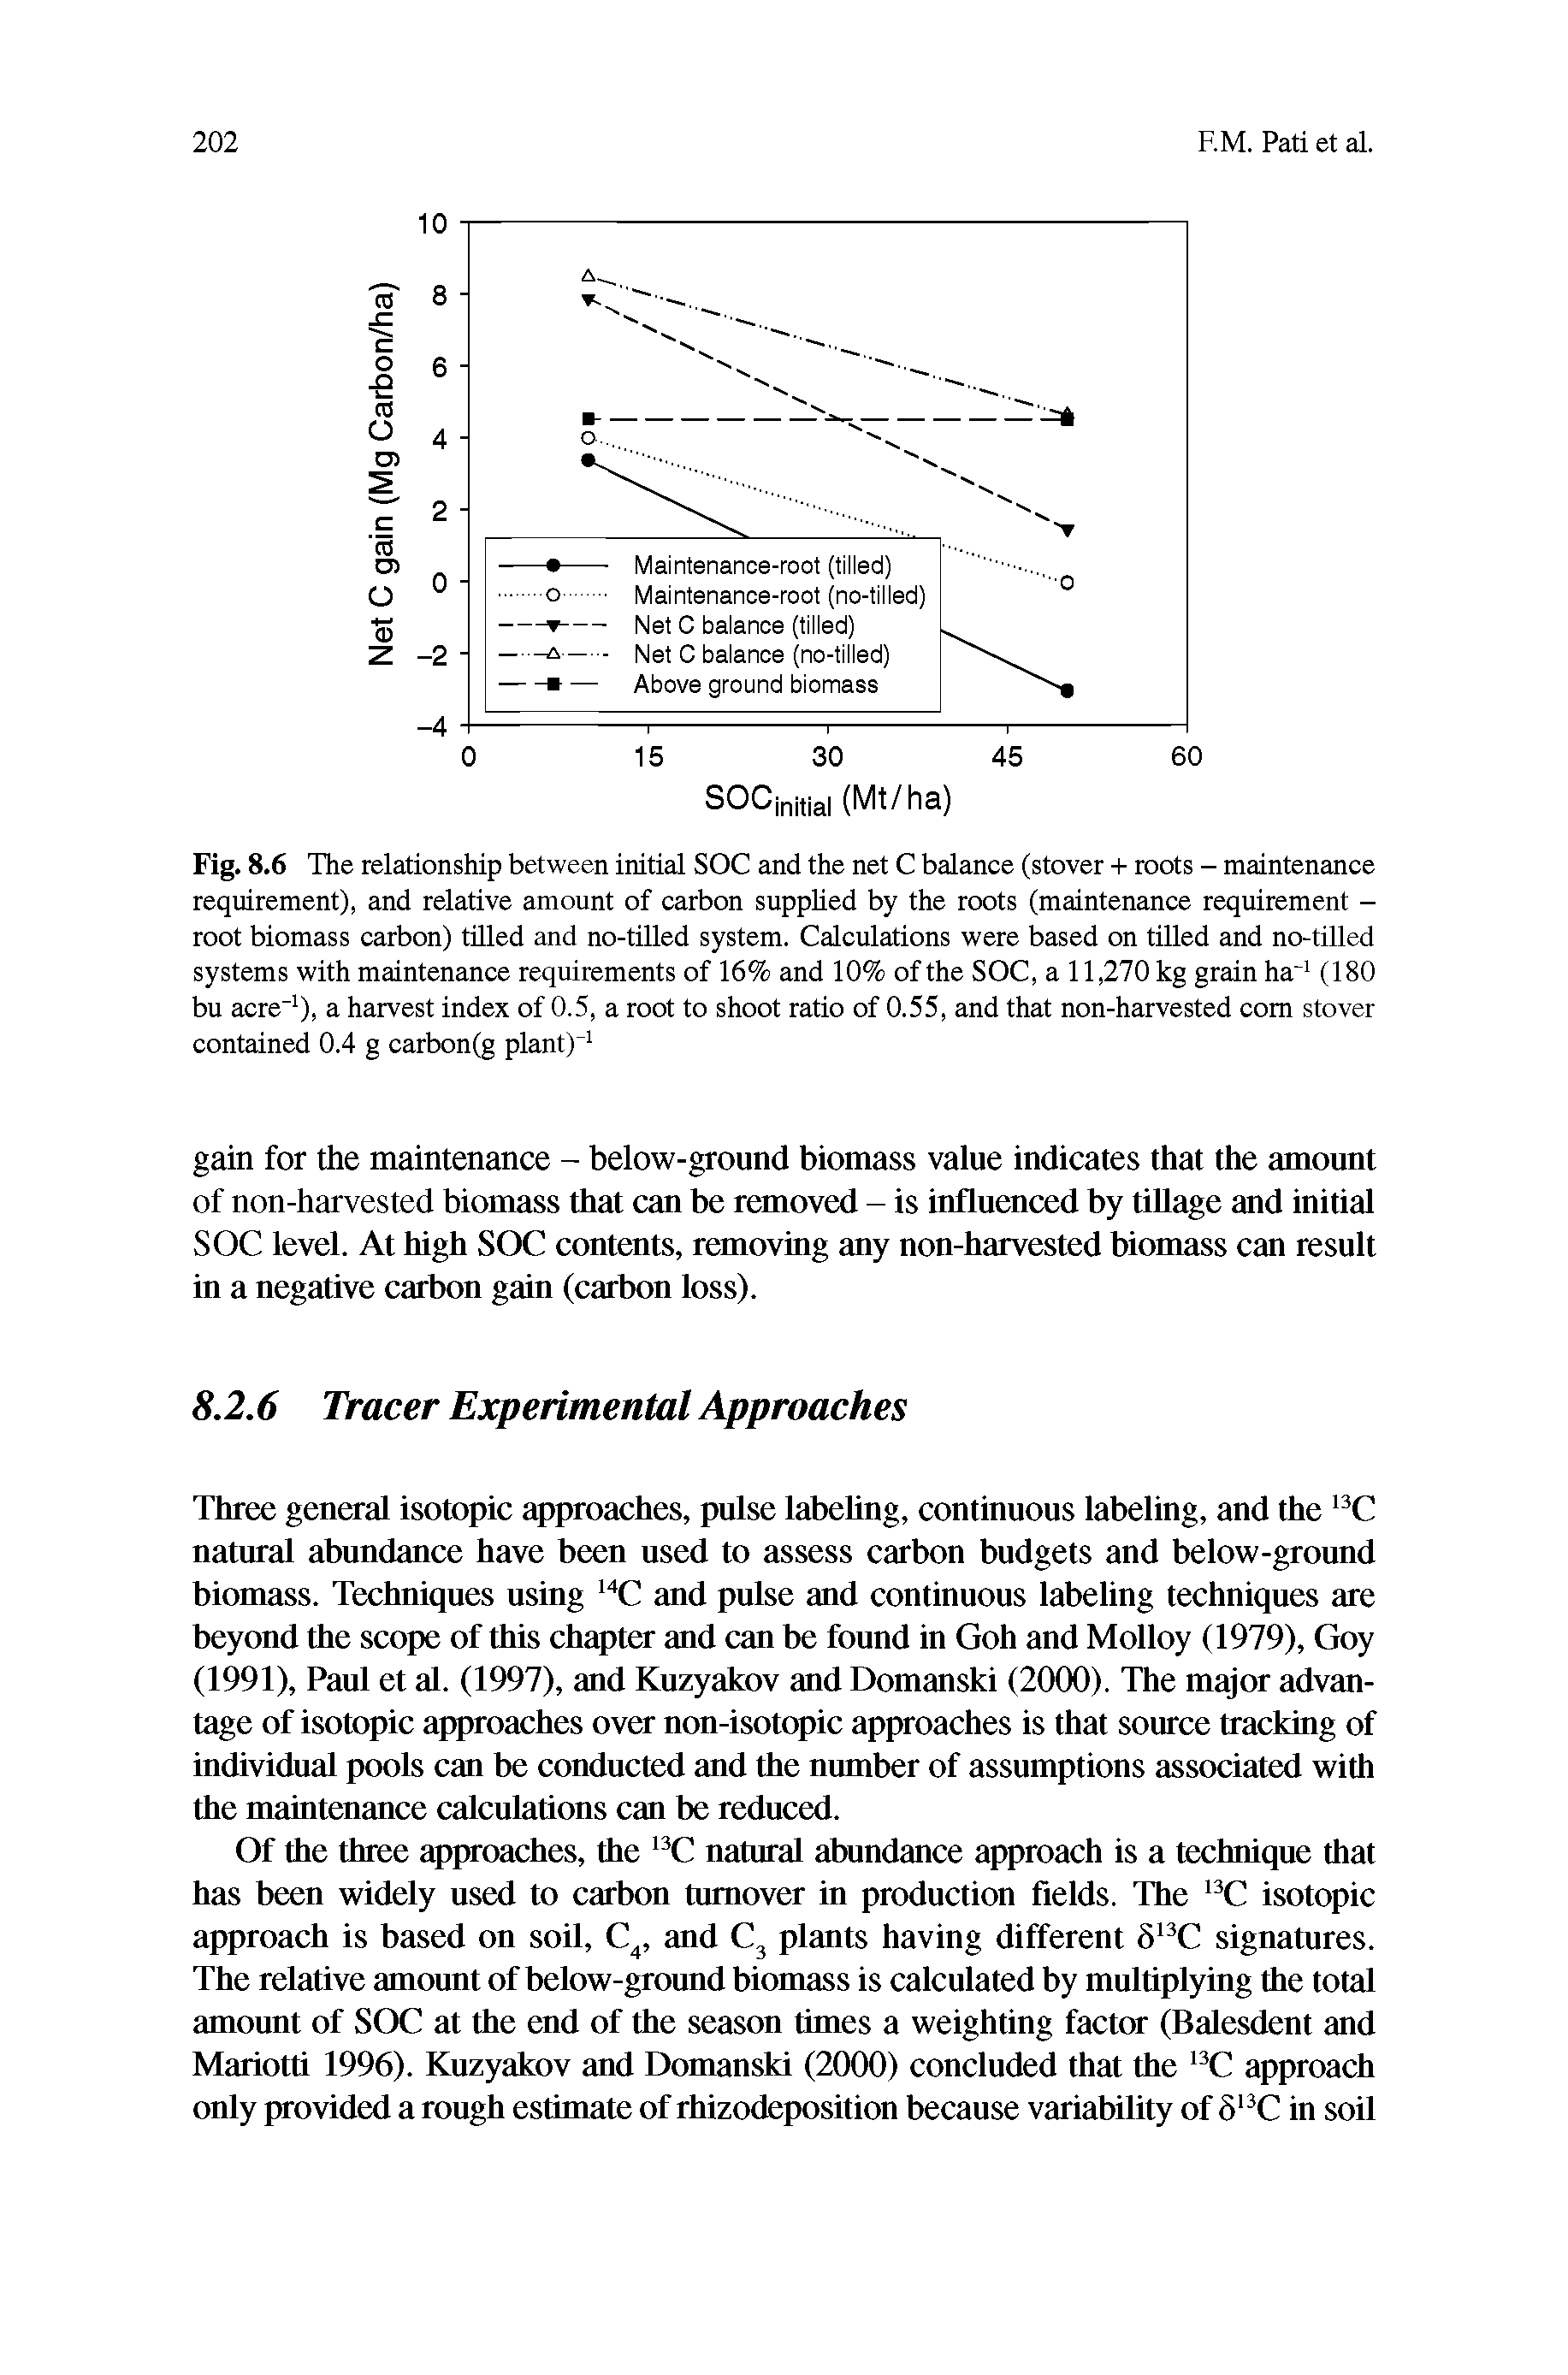 Fig. 8.6 The relationship between initial SOC and the net C balance (stover + roots - maintenance requirement), and relative amount of carbon supplied by the roots (maintenance requirement -root biomass carbon) tilled and no-tilled system. Calculations were based on tilled and no-tilled systems with maintenance requirements of 16% and 10% of the SOC, a 11,270 kg grain ha-1 (180 bu acre-1), a harvest index of 0.5, a root to shoot ratio of 0.55, and that non-harvested com stover contained 0.4 g carbon(g plant)-1...